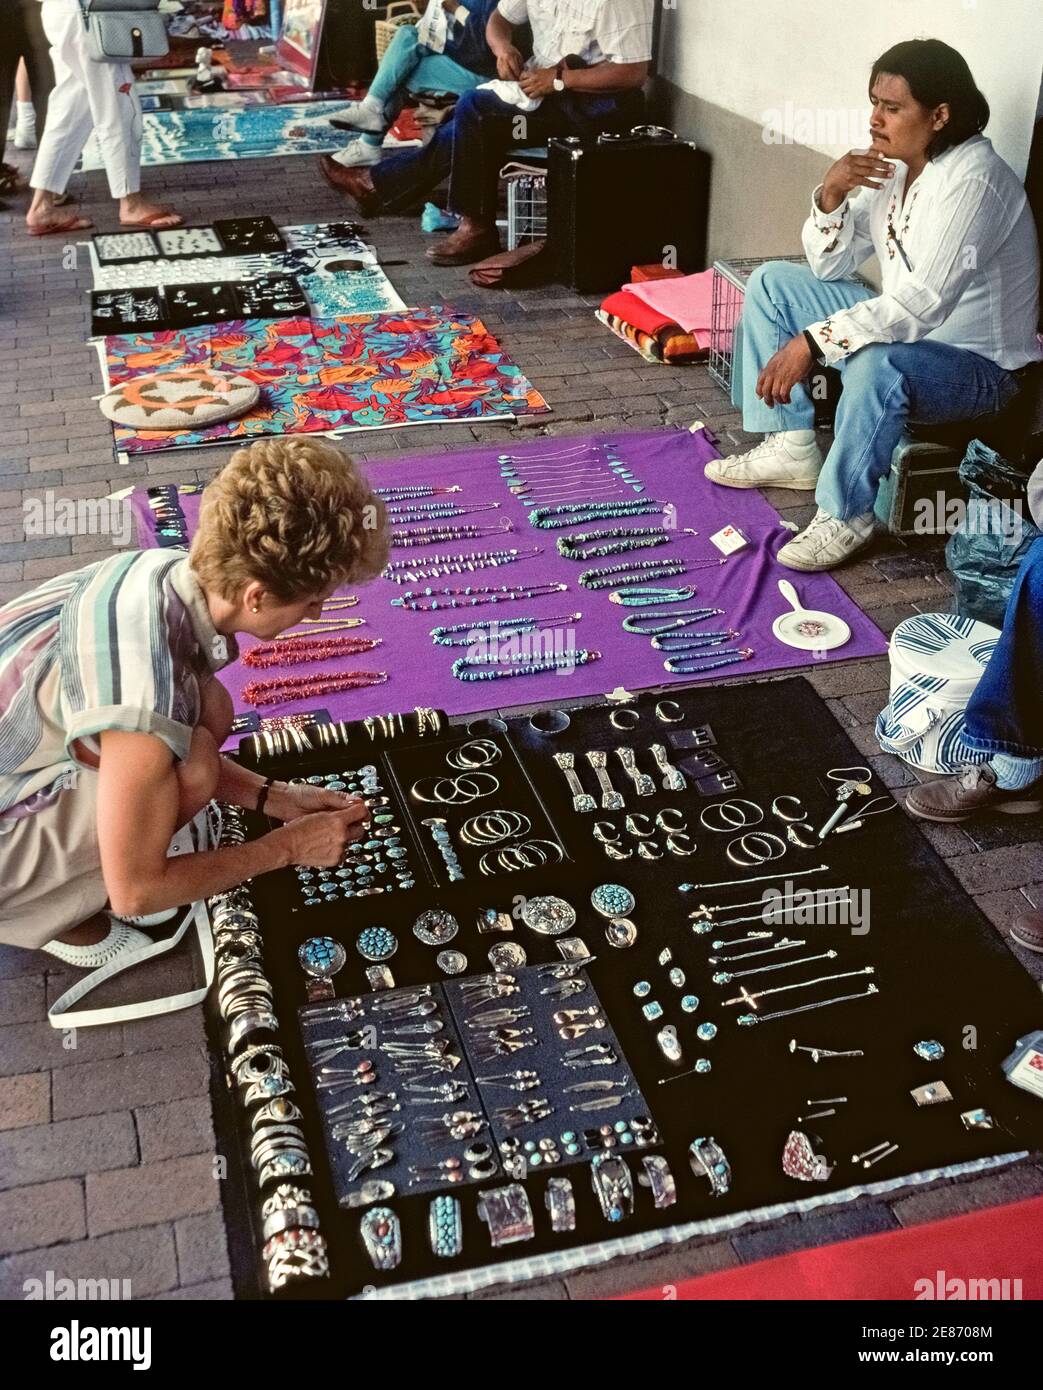 A female tourist stops to buy some Indian sterling silver jewelry displayed on the sidewalk at an outdoor market of Native American handicrafts at the downtown plaza in Santa Fe, New Mexico, USA. For more than a half century, American Indian artisans have been selling jewelry, beadwork, weavings, pottery and other handmade arts and crafts while sitting under the Palace of the Governor portal on the north side of plaza. The Palace is home to the New Mexico History Museum and a National Historic Landmark. Stock Photo